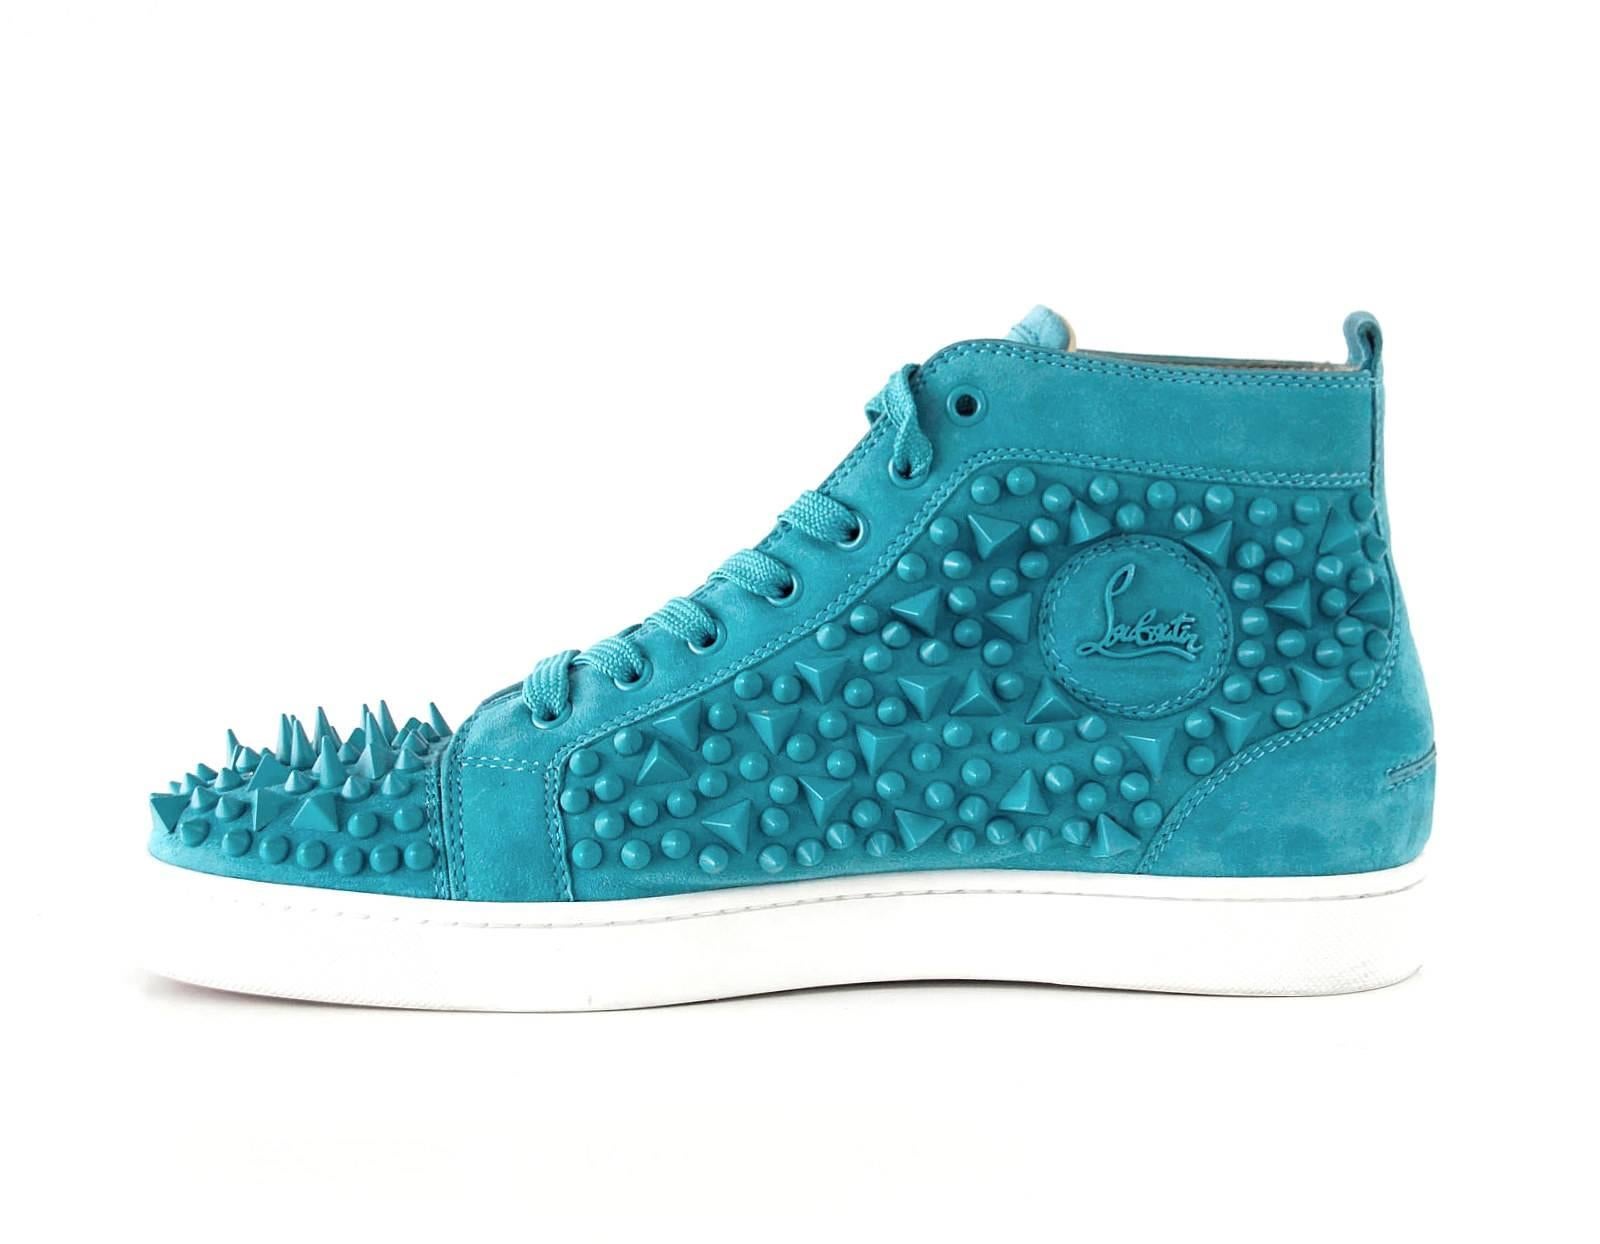 Guaranteed authentic CHRISTIAN LOUBOUTIN men's Turquoise suede Louis Pik Pik sneaker.
Hightop sneaker accentuated with white piping trim.
Except for some very minimal marks on the white side wall the shoe is without flaws.
Comes with original box